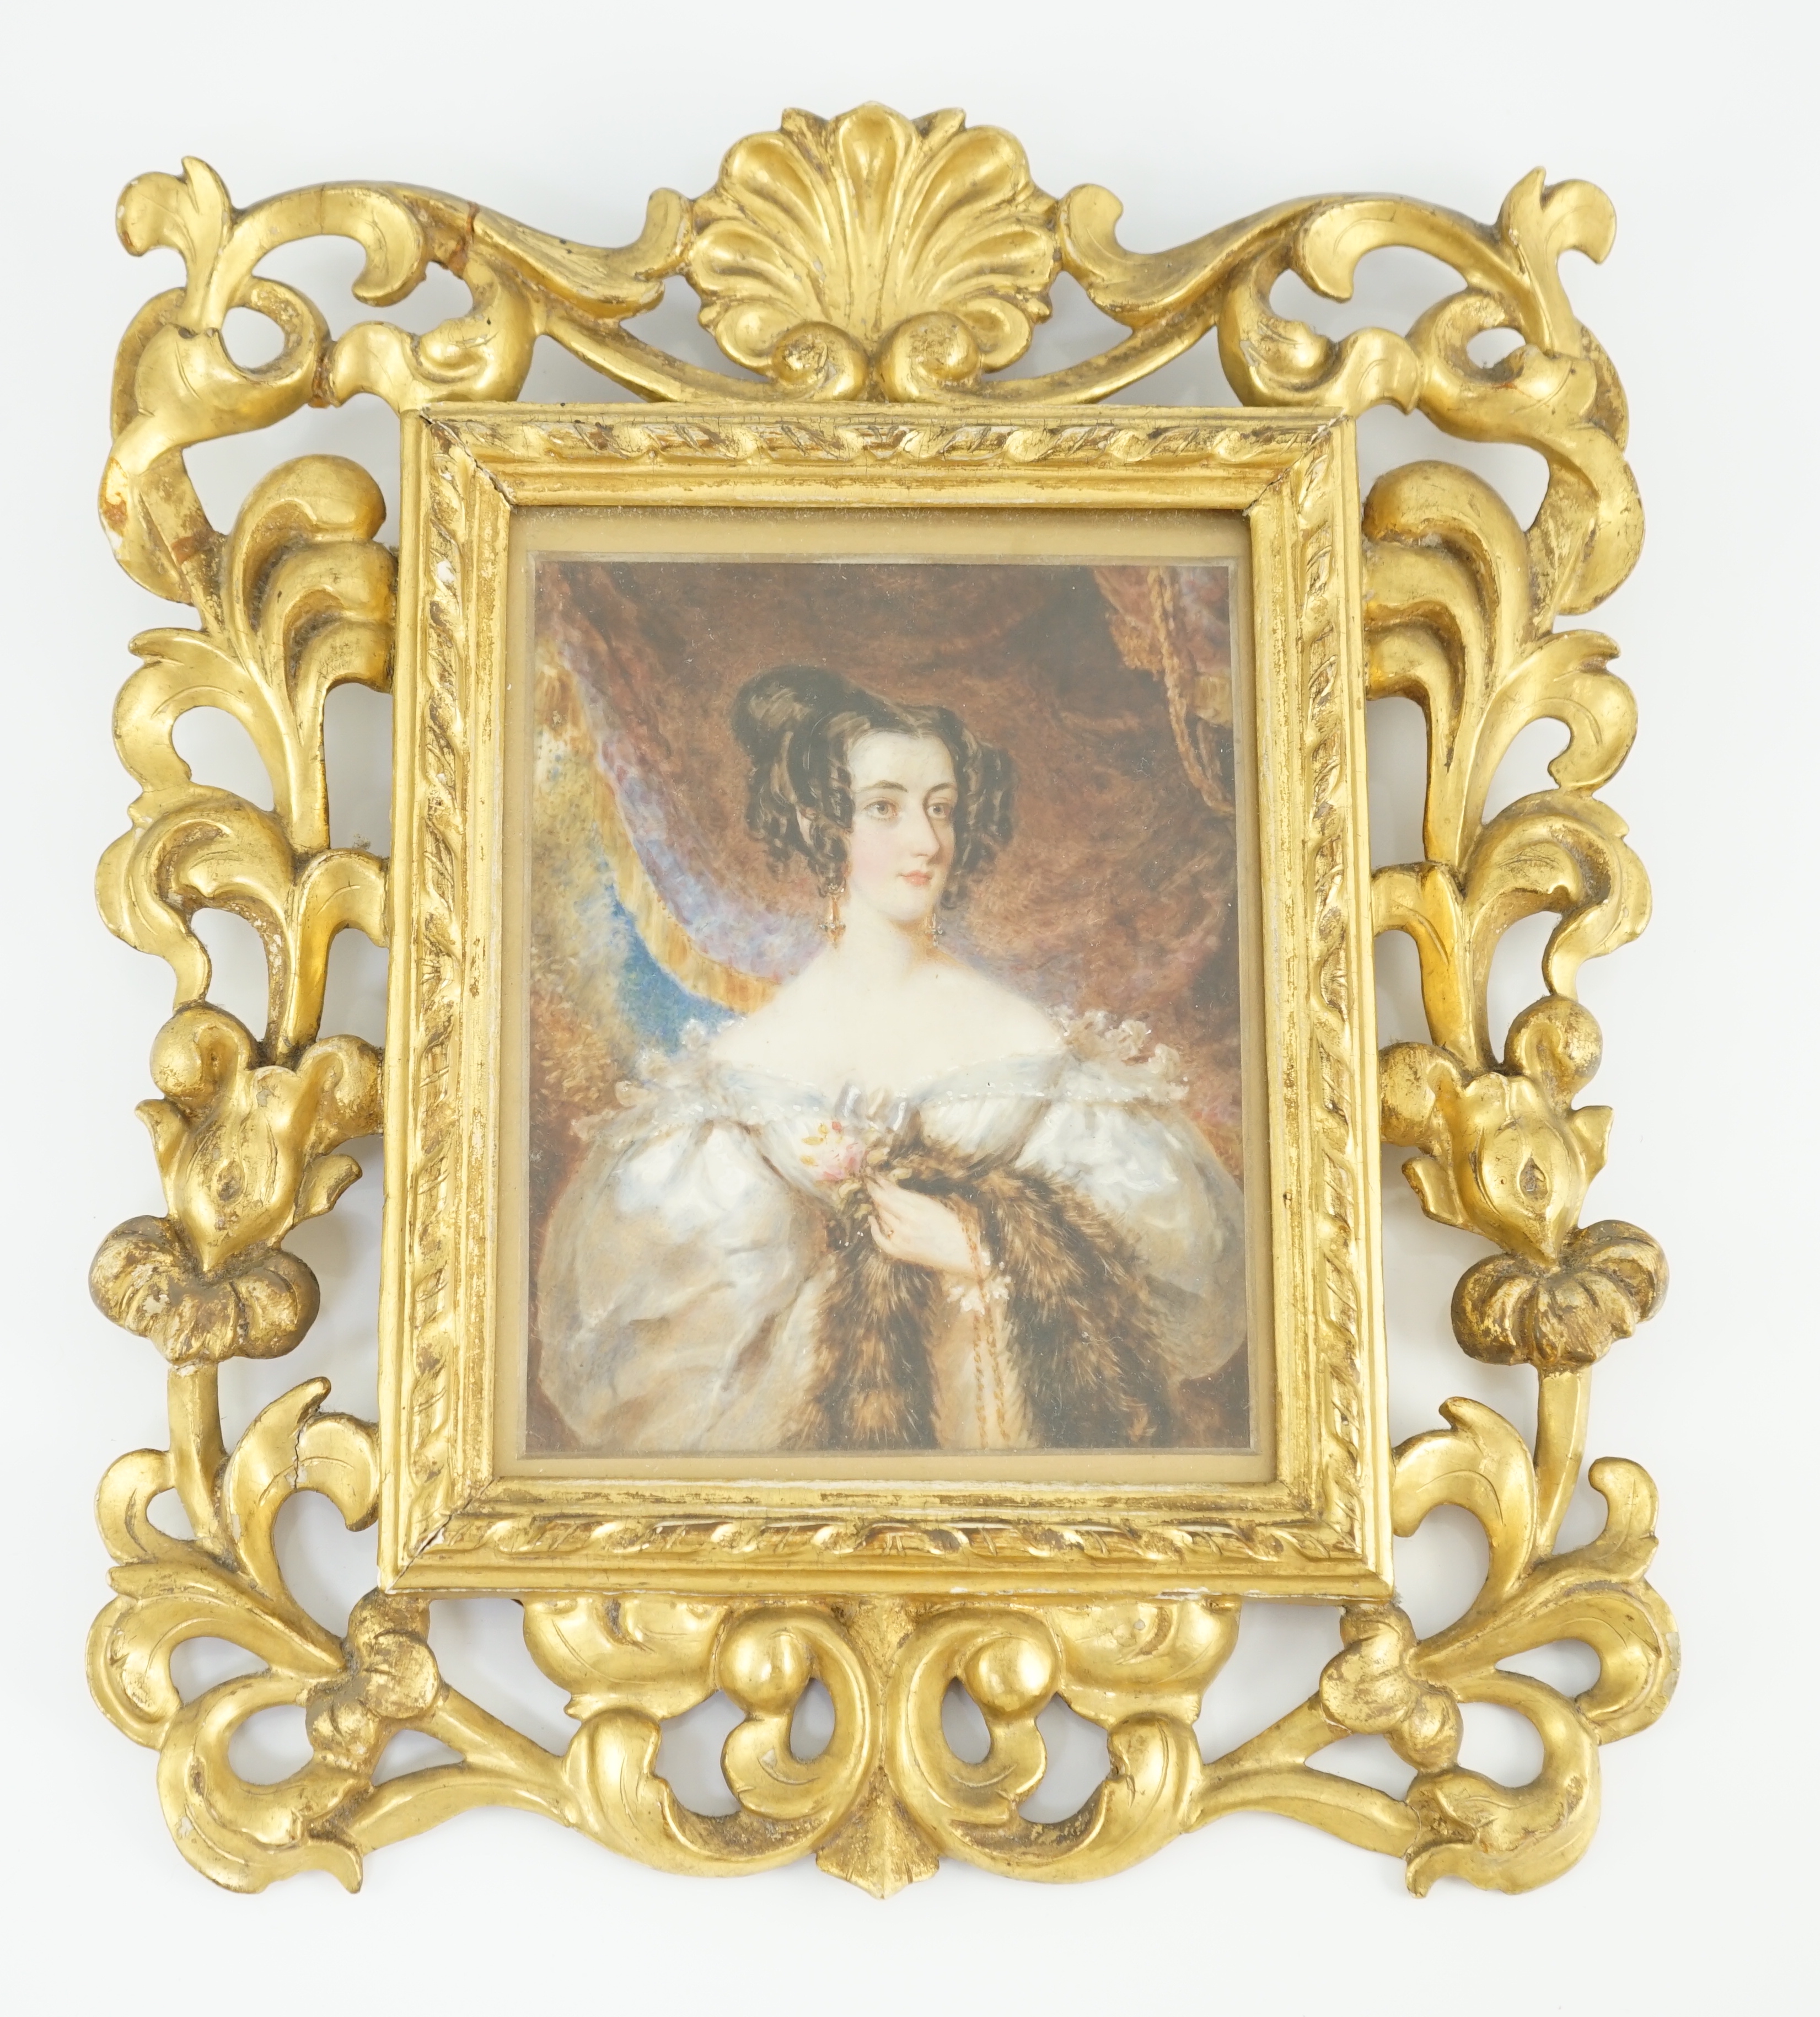 English School circa 1830, Portrait miniature of Mrs Henry Dixon of Astle, Cheshire, watercolour on ivory, 14.8 x 11.7cm. CITES Submission reference M5VUG66K